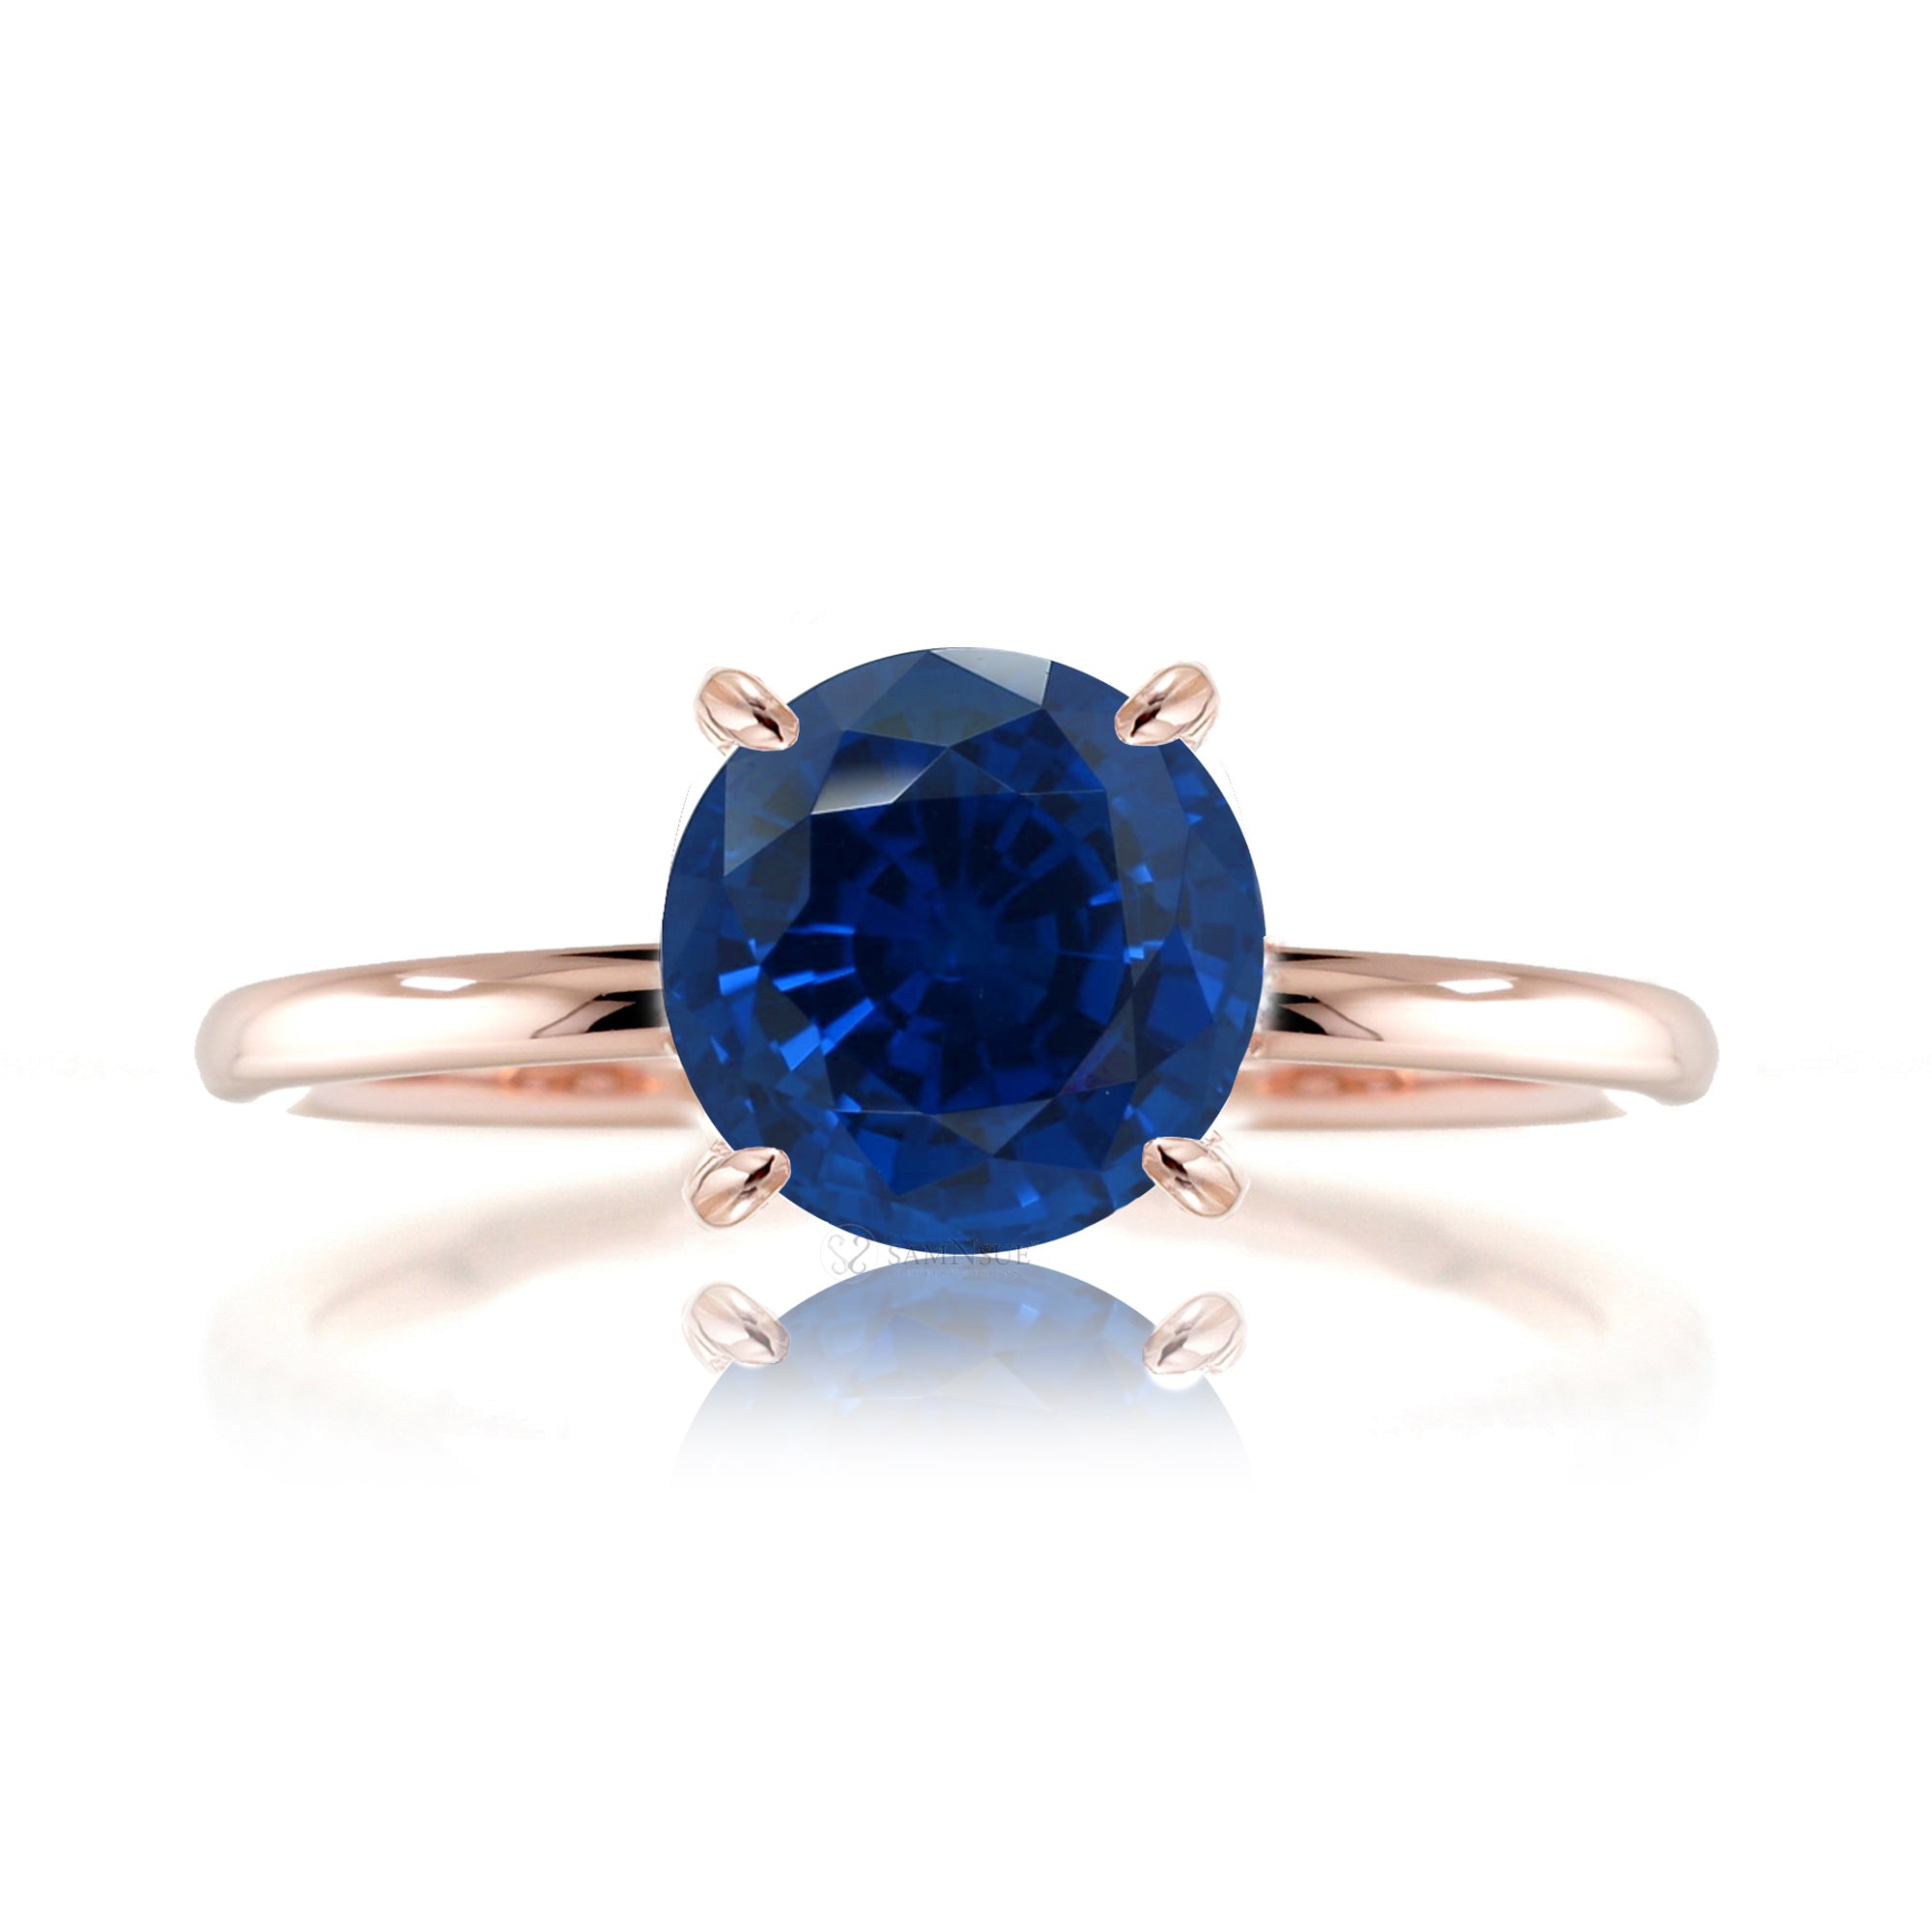 Round blue sapphire solid band engagement ring rose  gold - the Ava